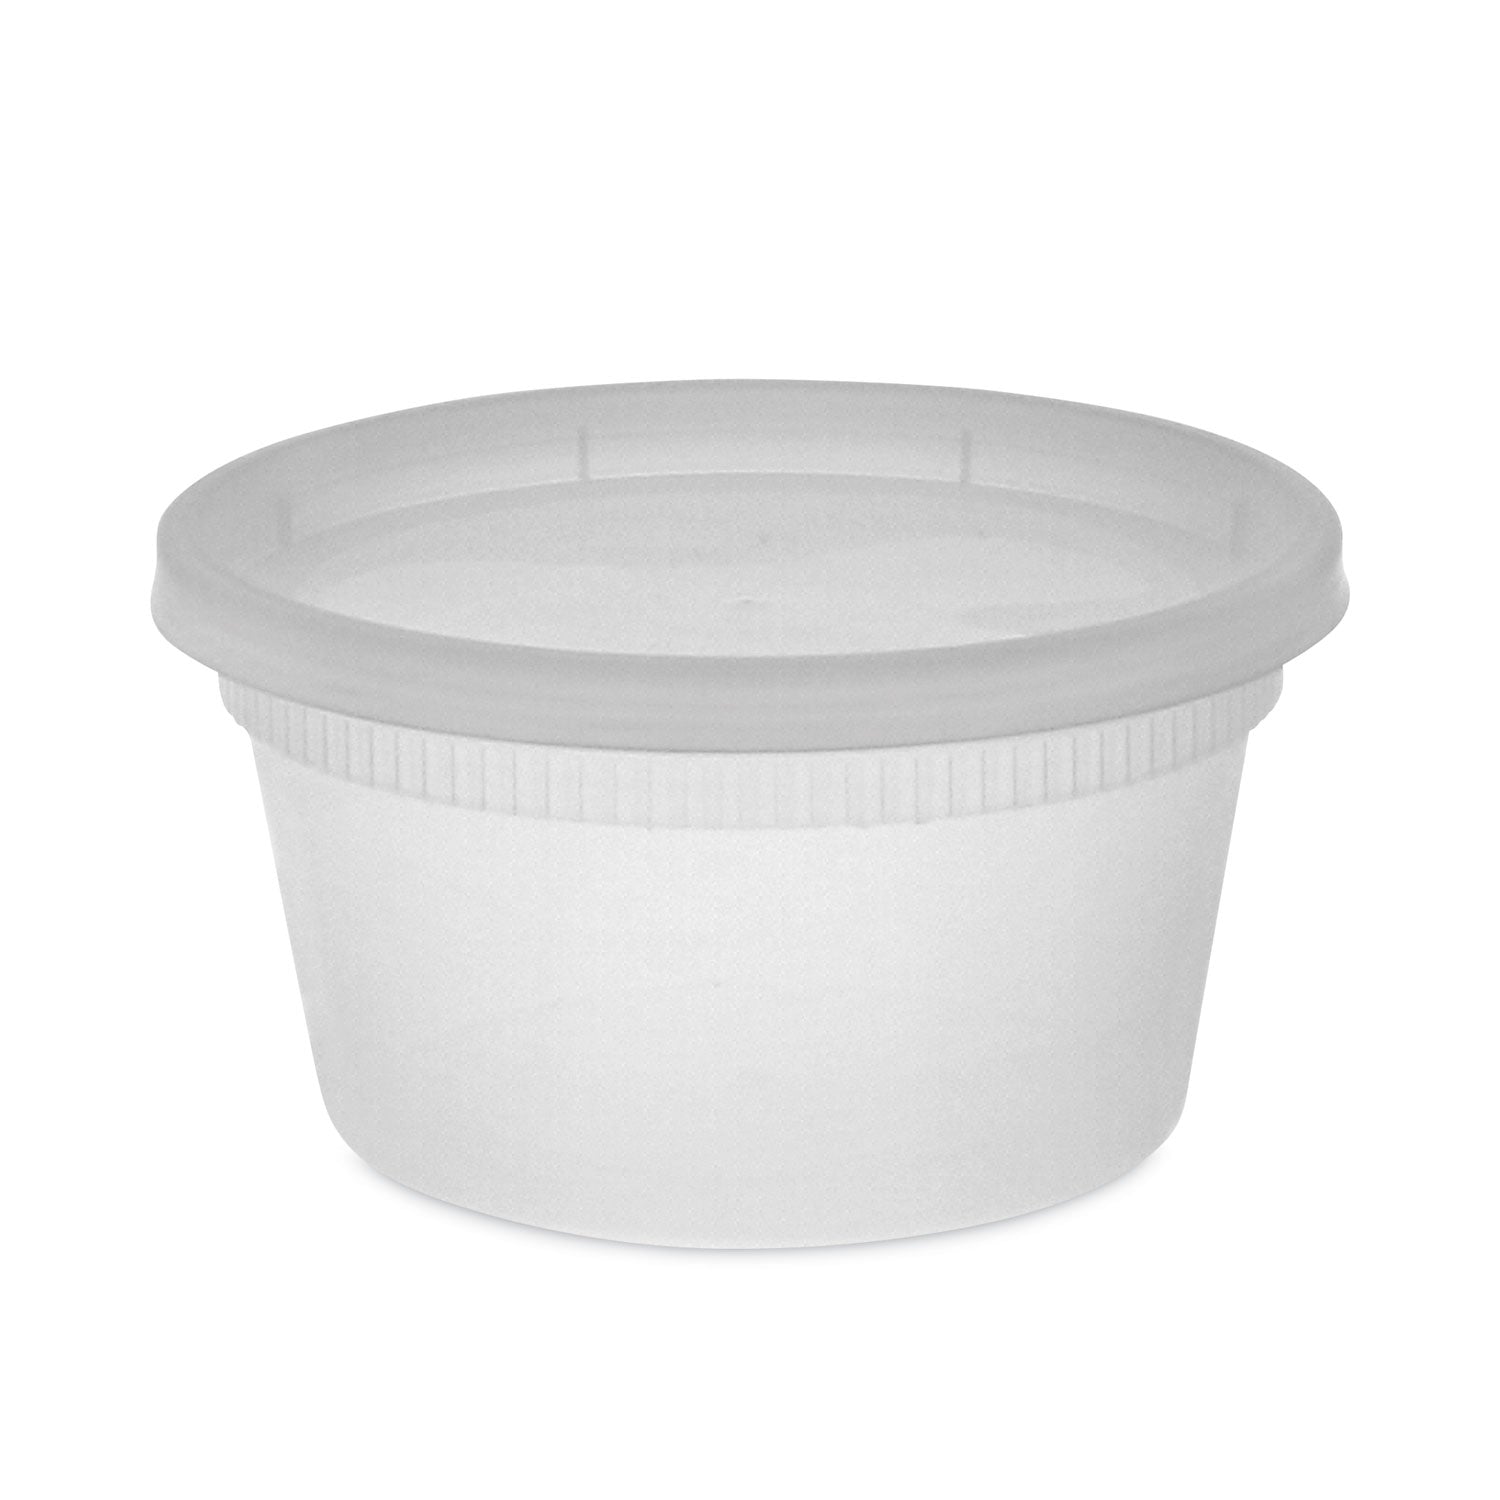 Newspring DELItainer Microwavable Container, 12 oz, 4.55 x 2.45 x 2.45, Clear, Plastic, 240/Carton - 